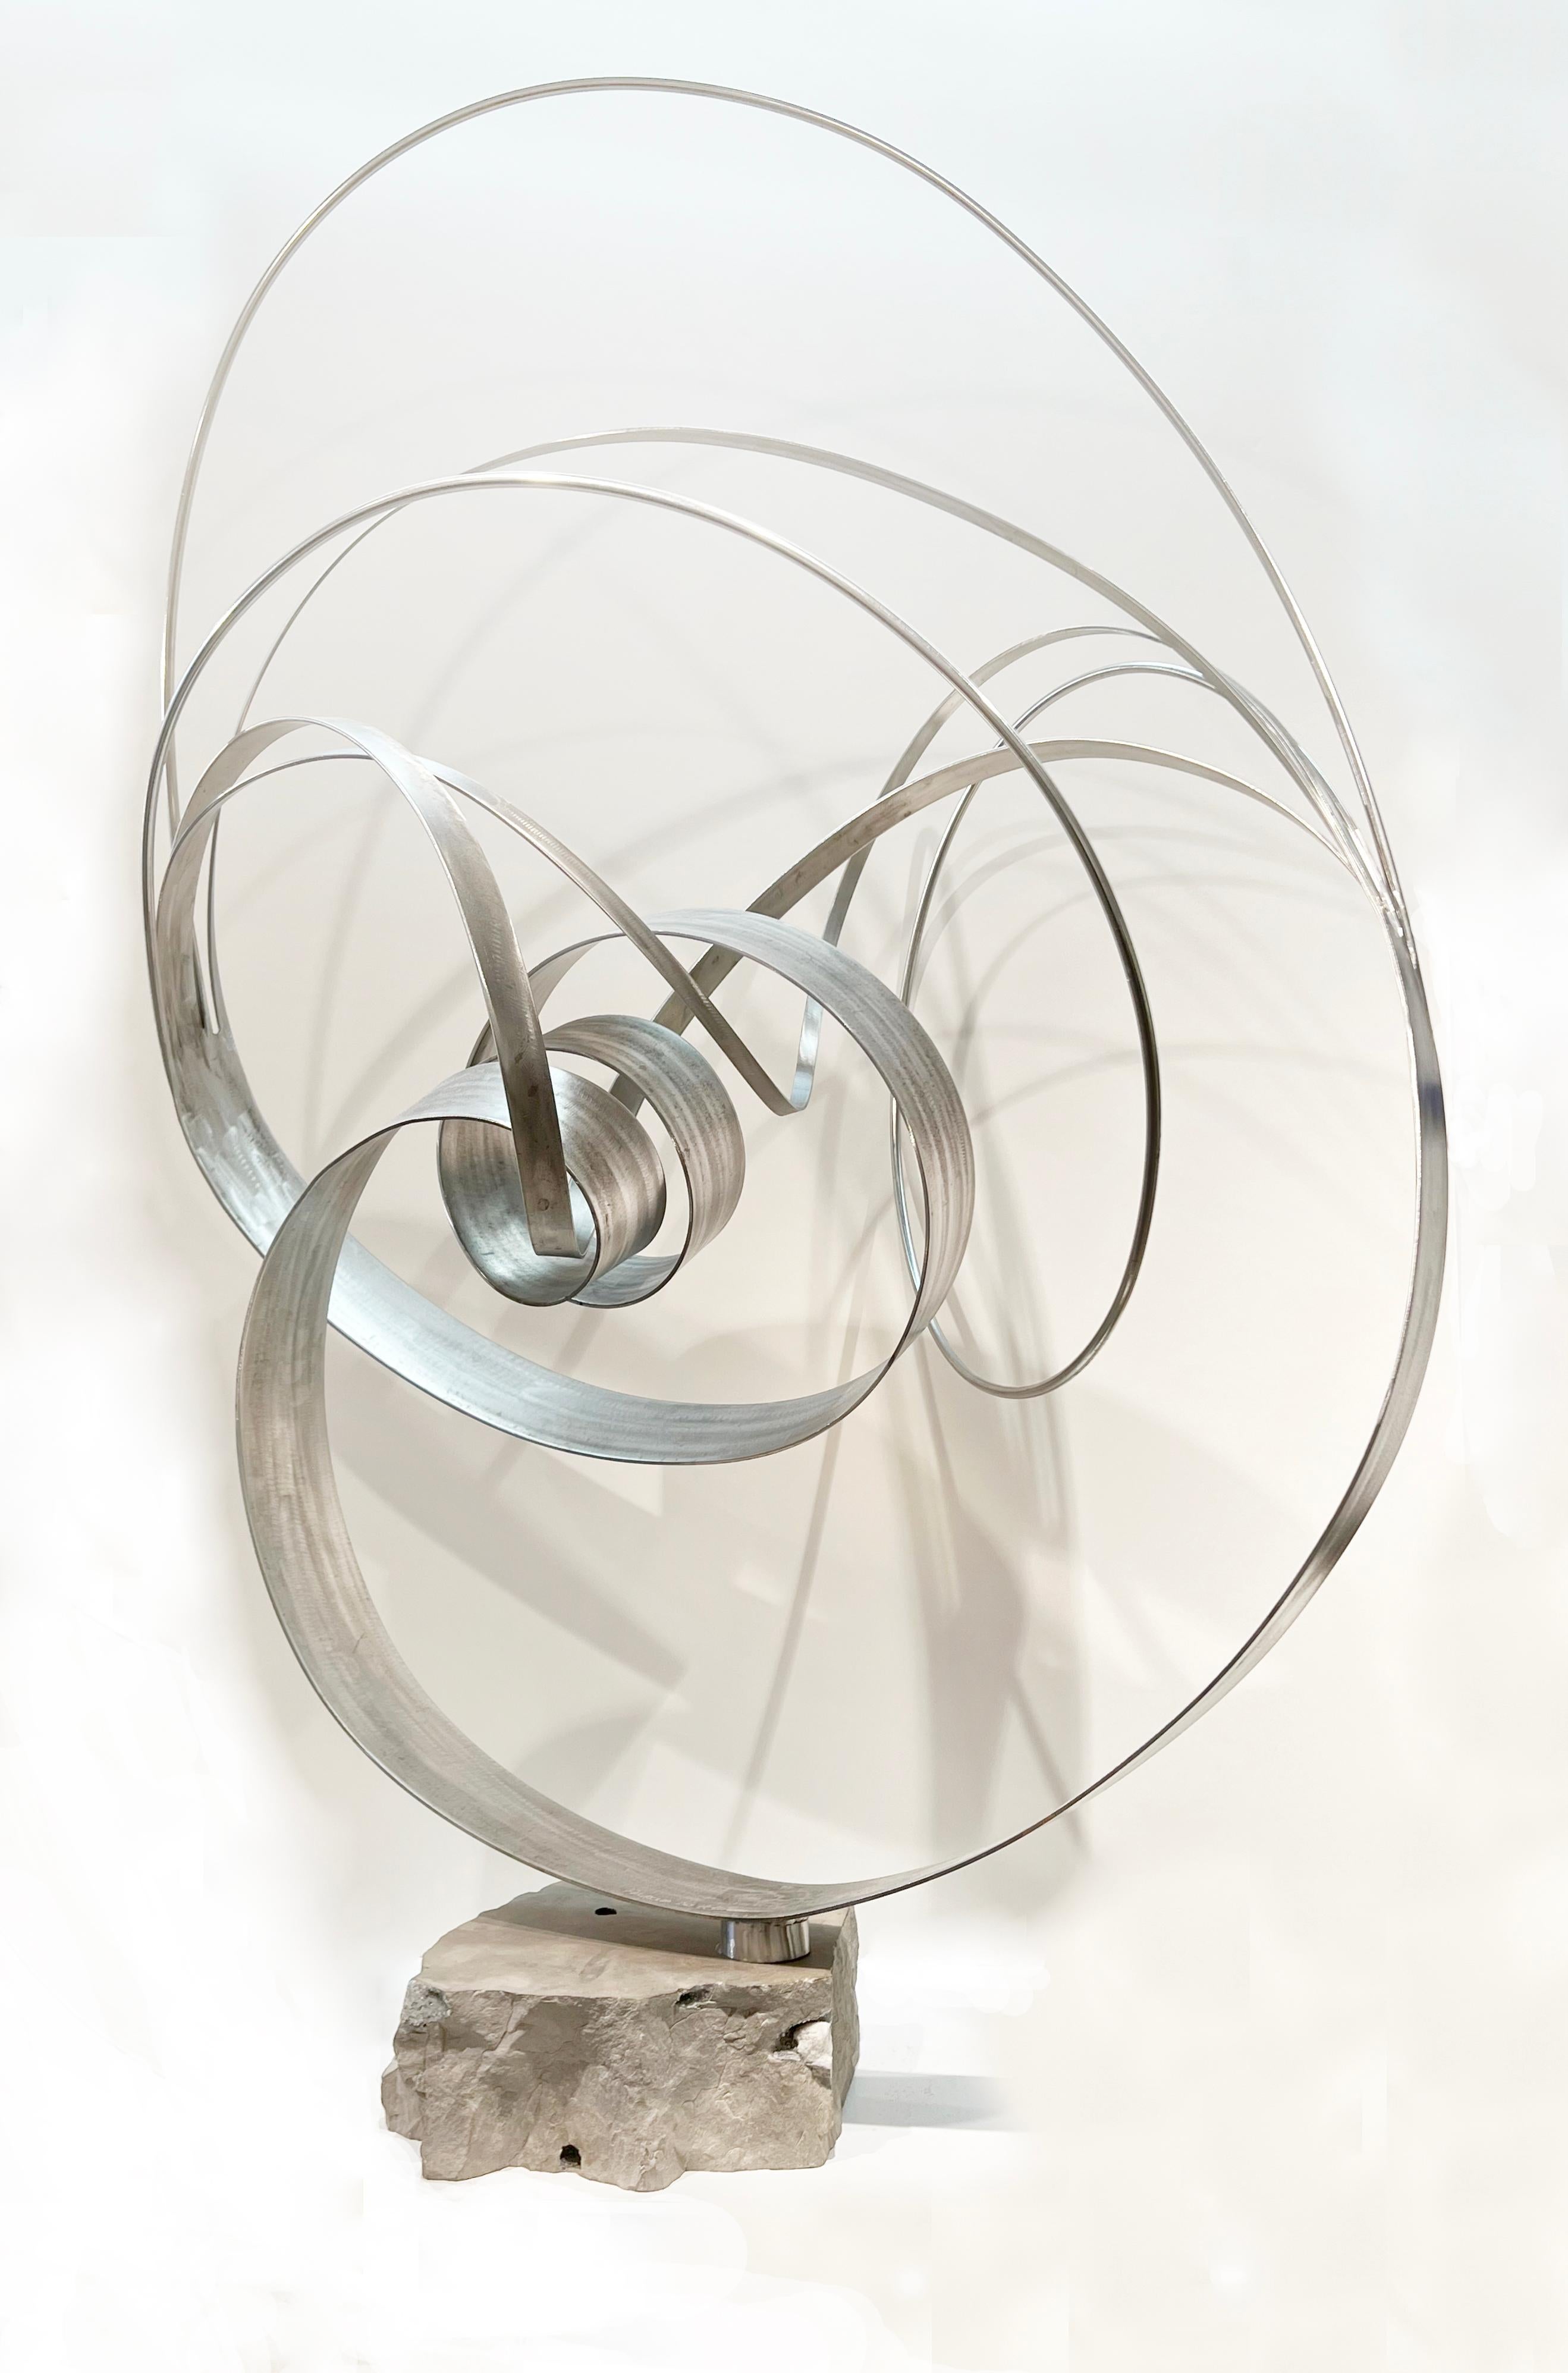 Regroup, large stainless steel and stone spiral abstract sculpture, 2021